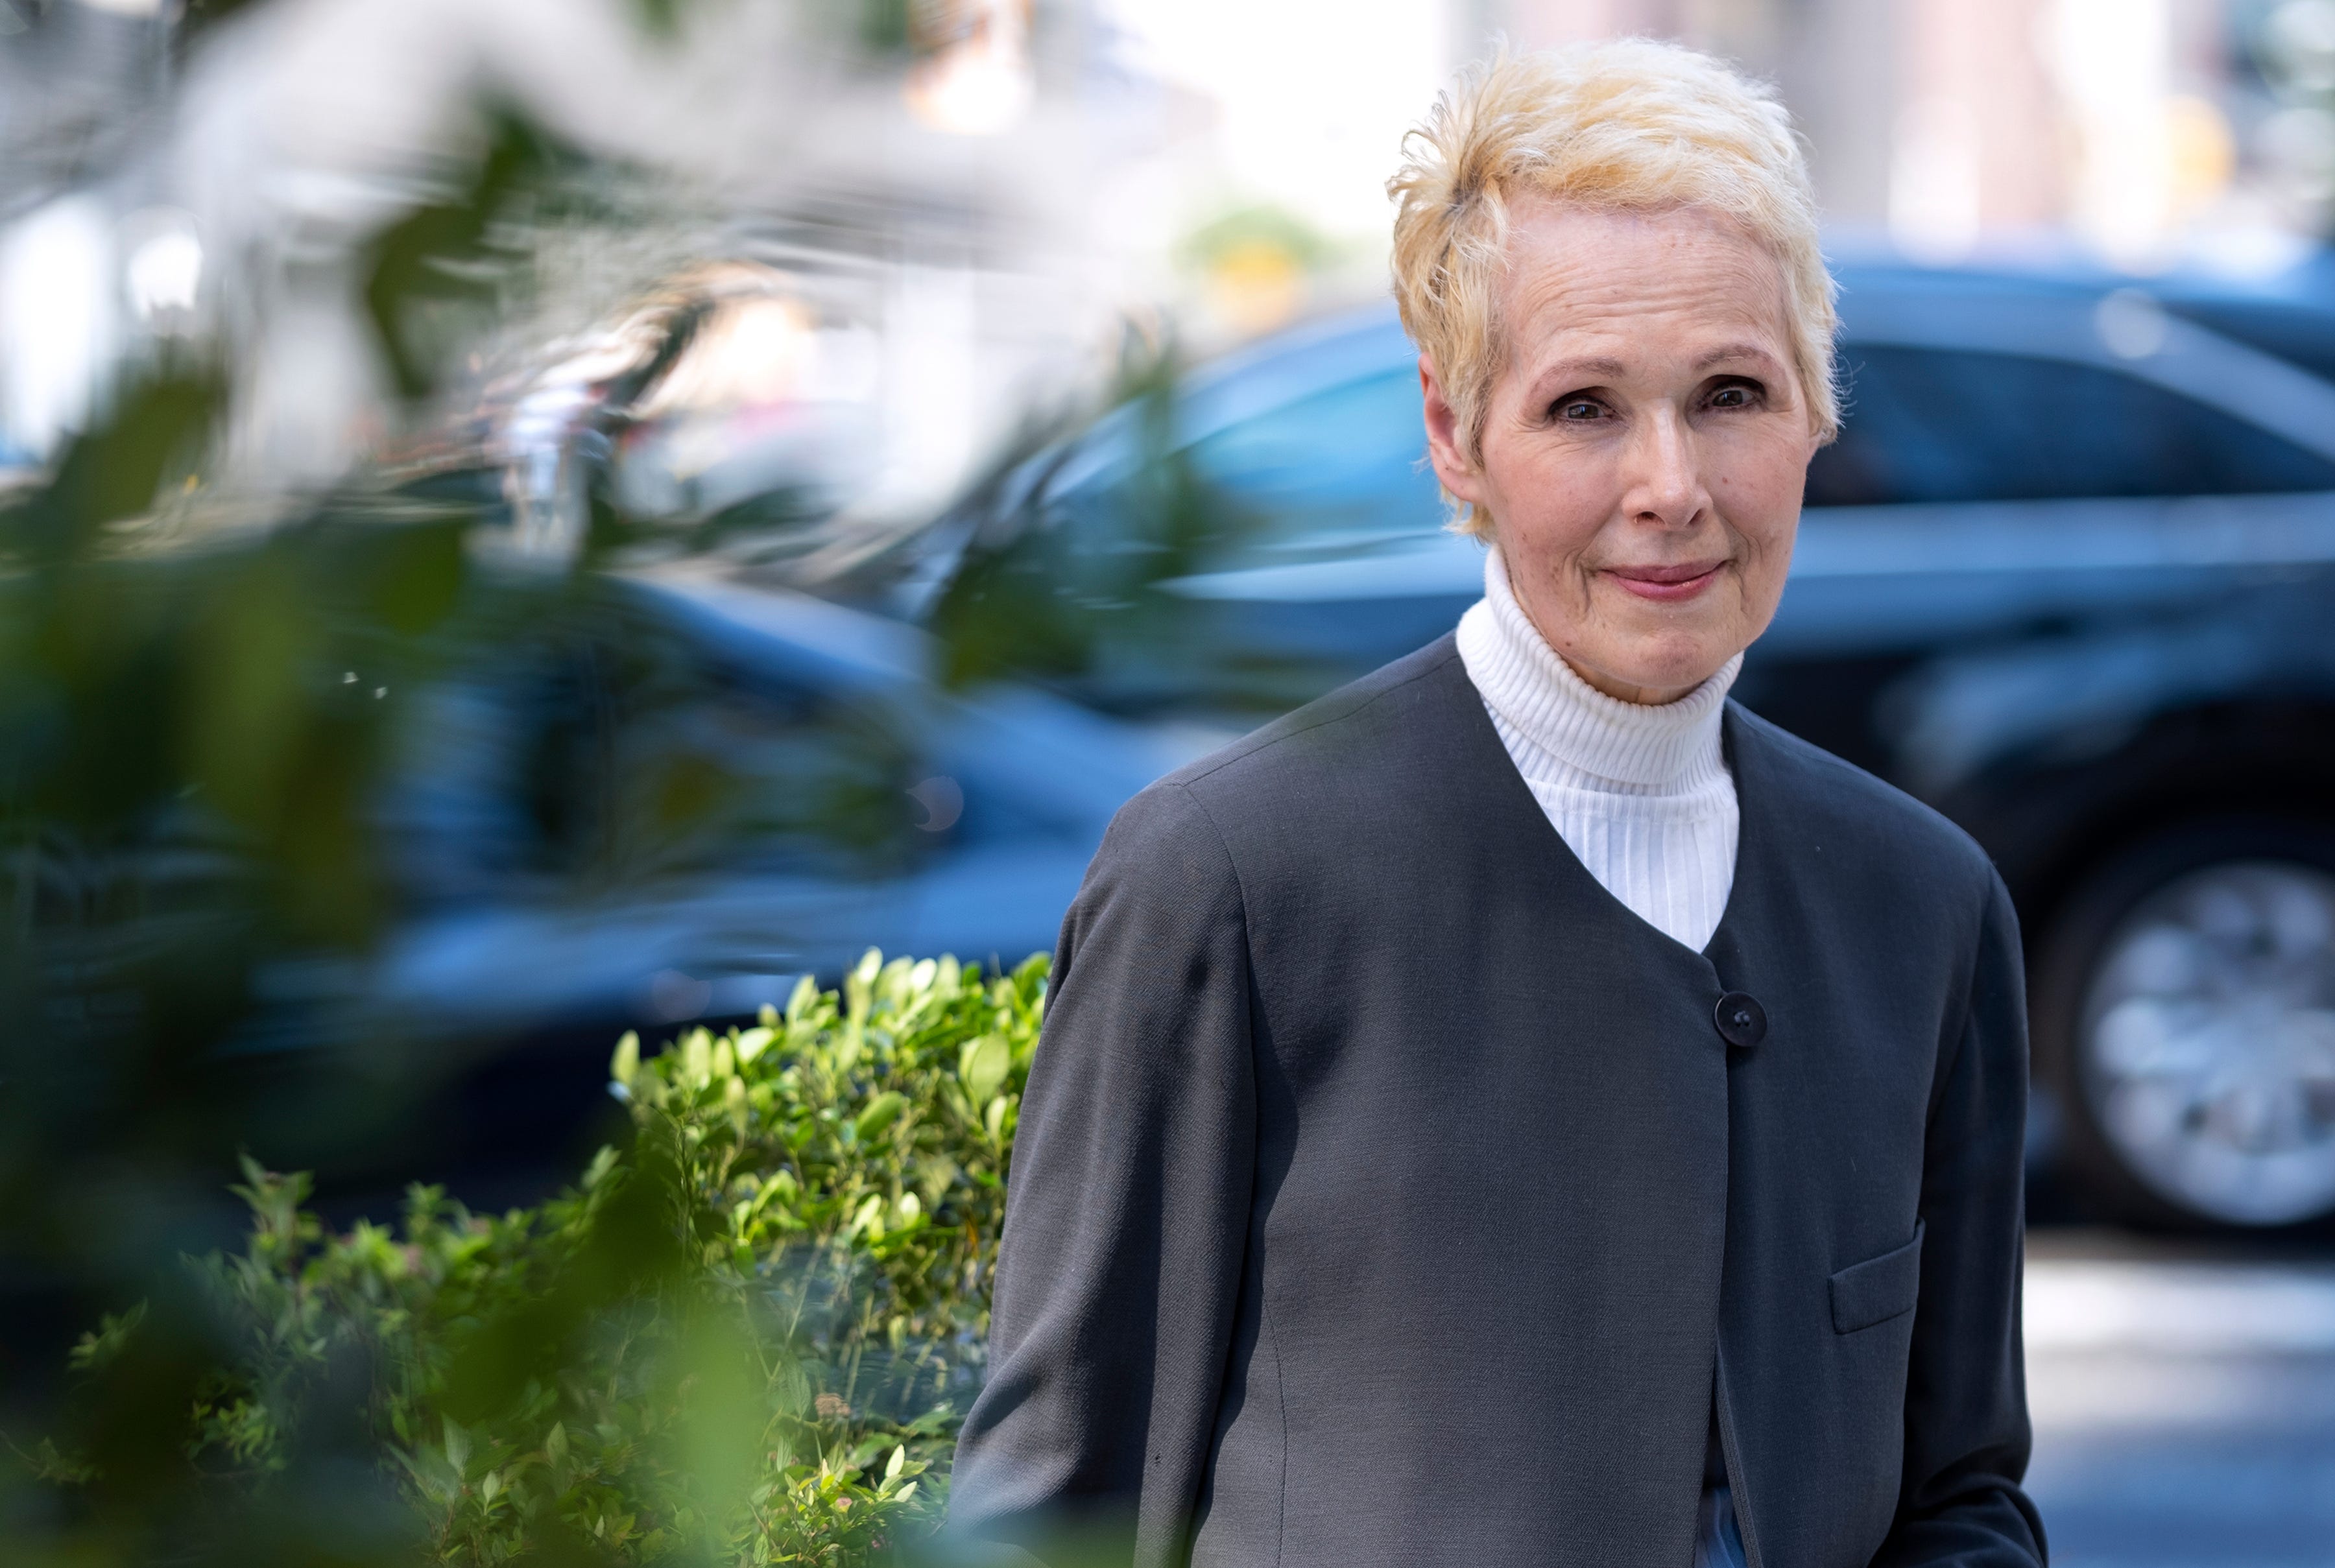 Who is Elizabeth Jean Carroll? What happened between her and Donald Trump?